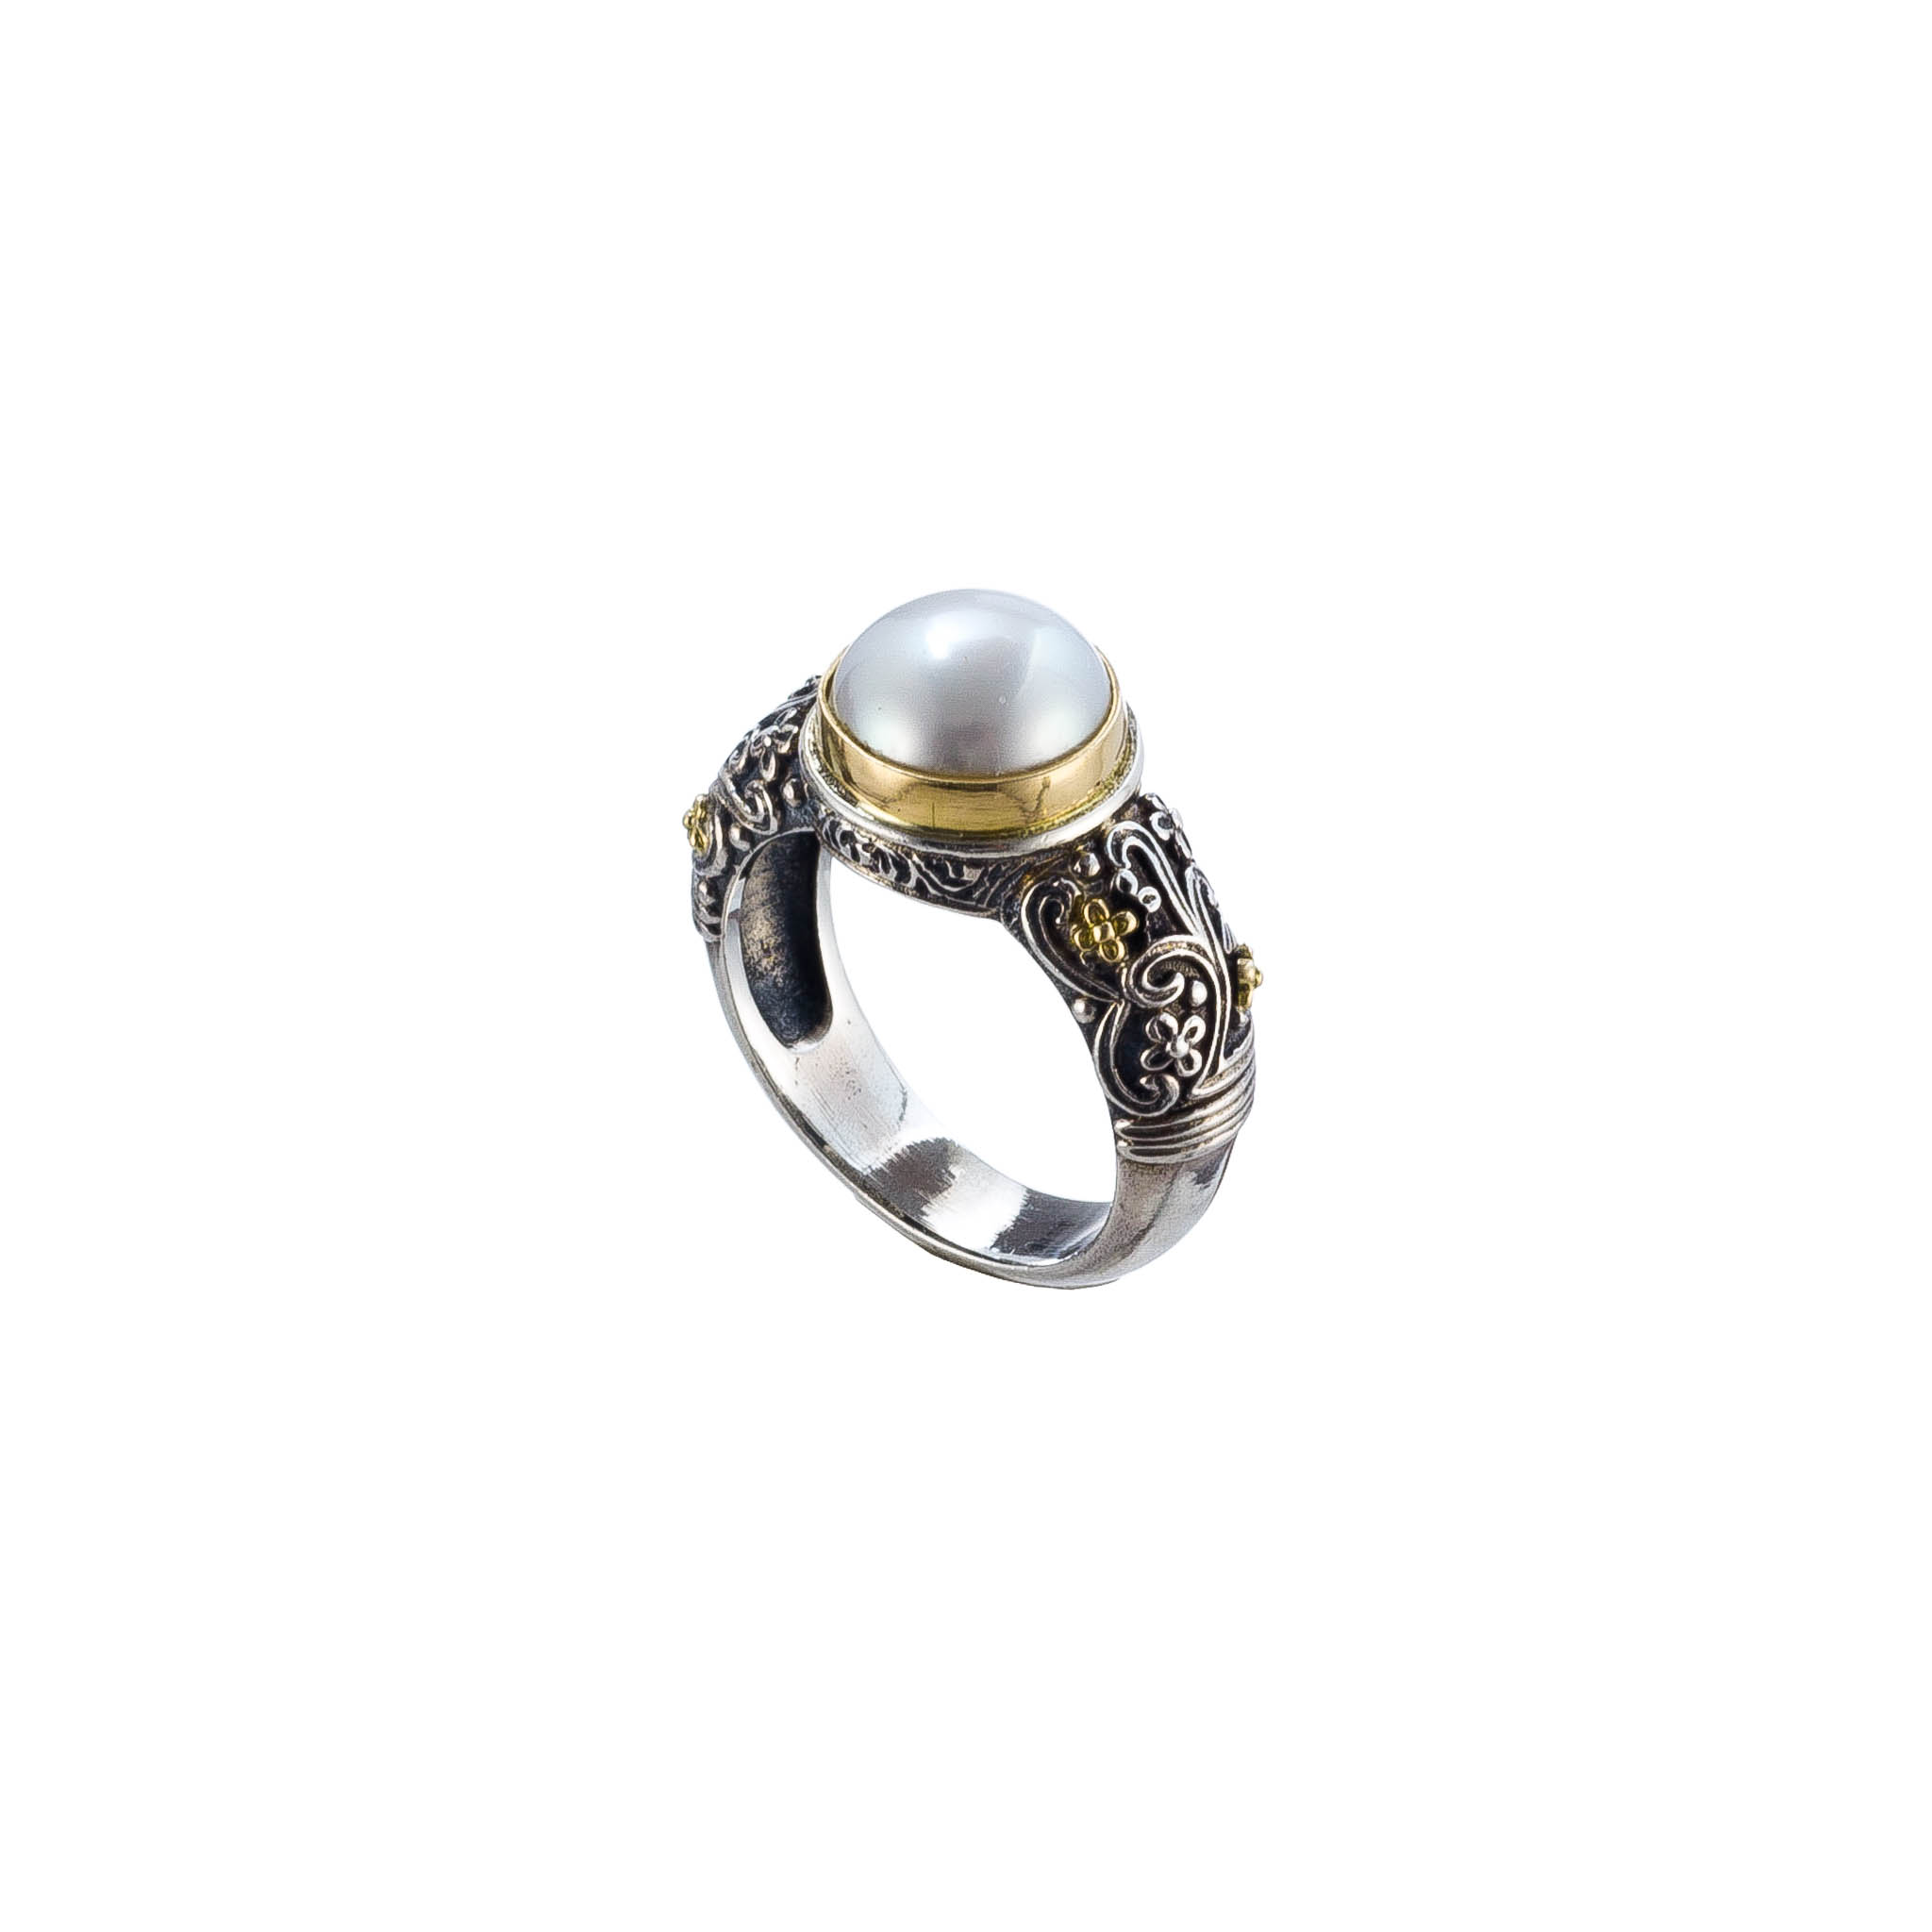 Eve ring in 18K Gold and Sterling Silver with a pearl